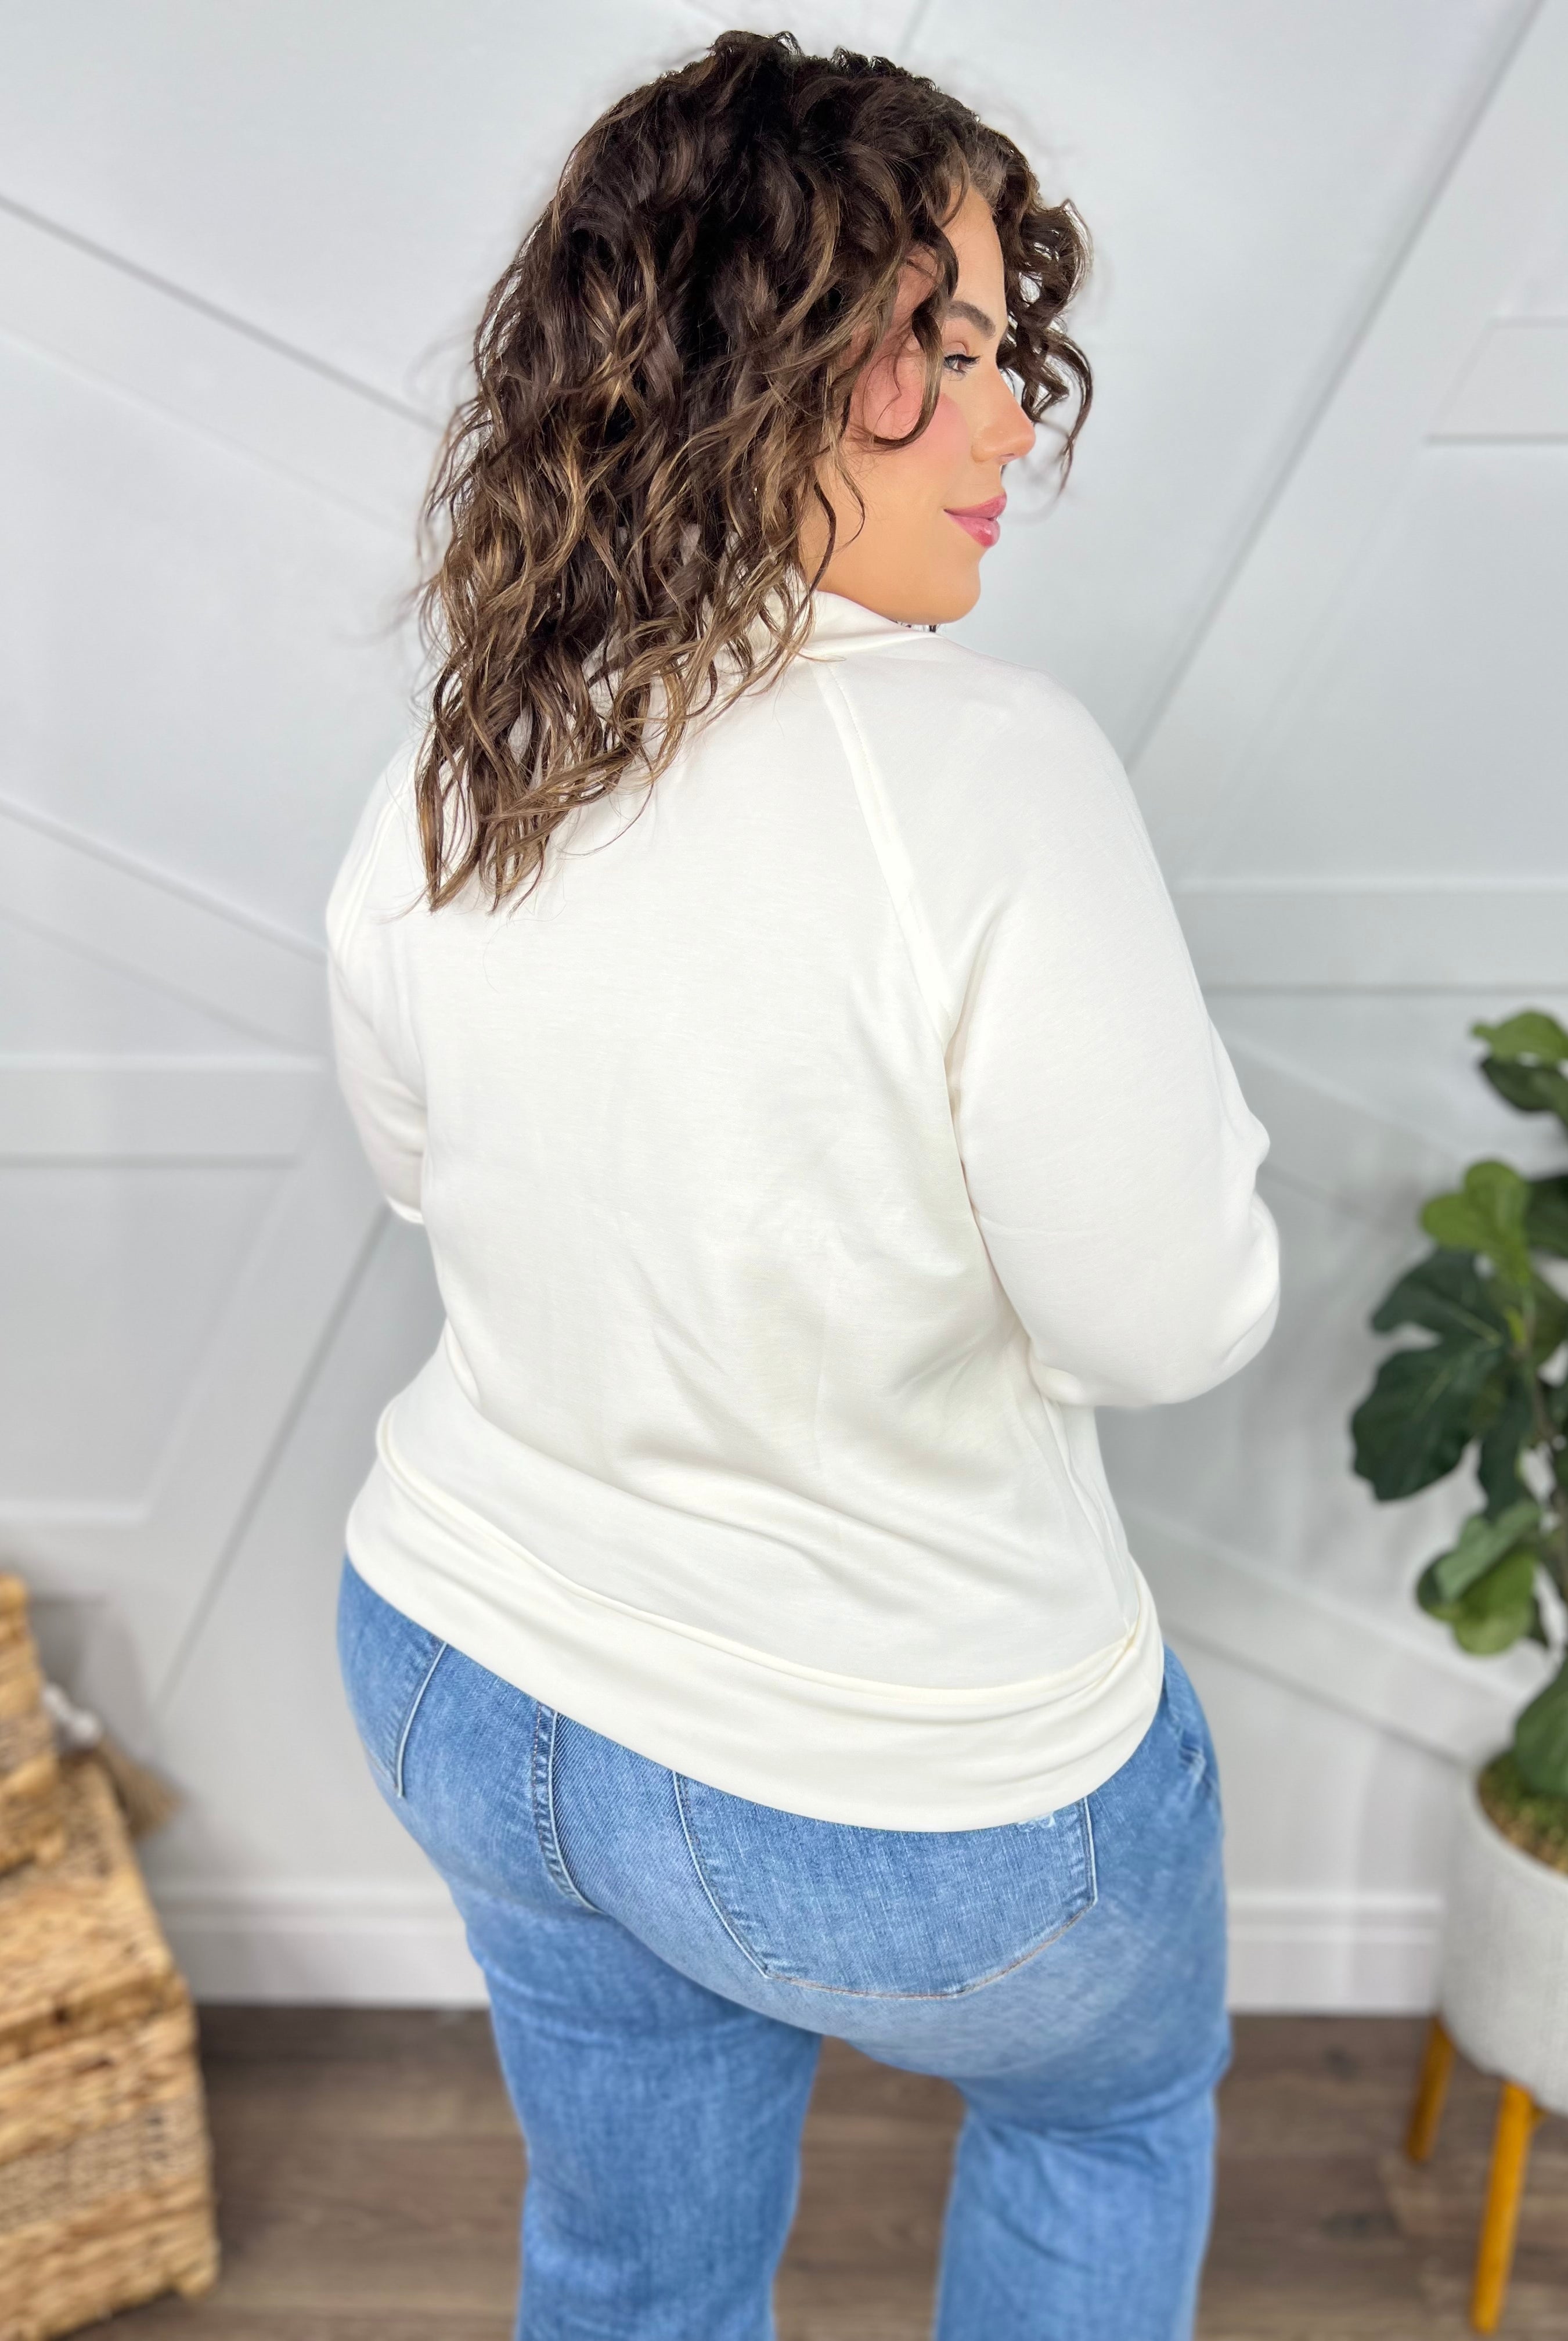 Make Memories Cowl Neck Top-120 Long Sleeve Tops-White Birch-Heathered Boho Boutique, Women's Fashion and Accessories in Palmetto, FL